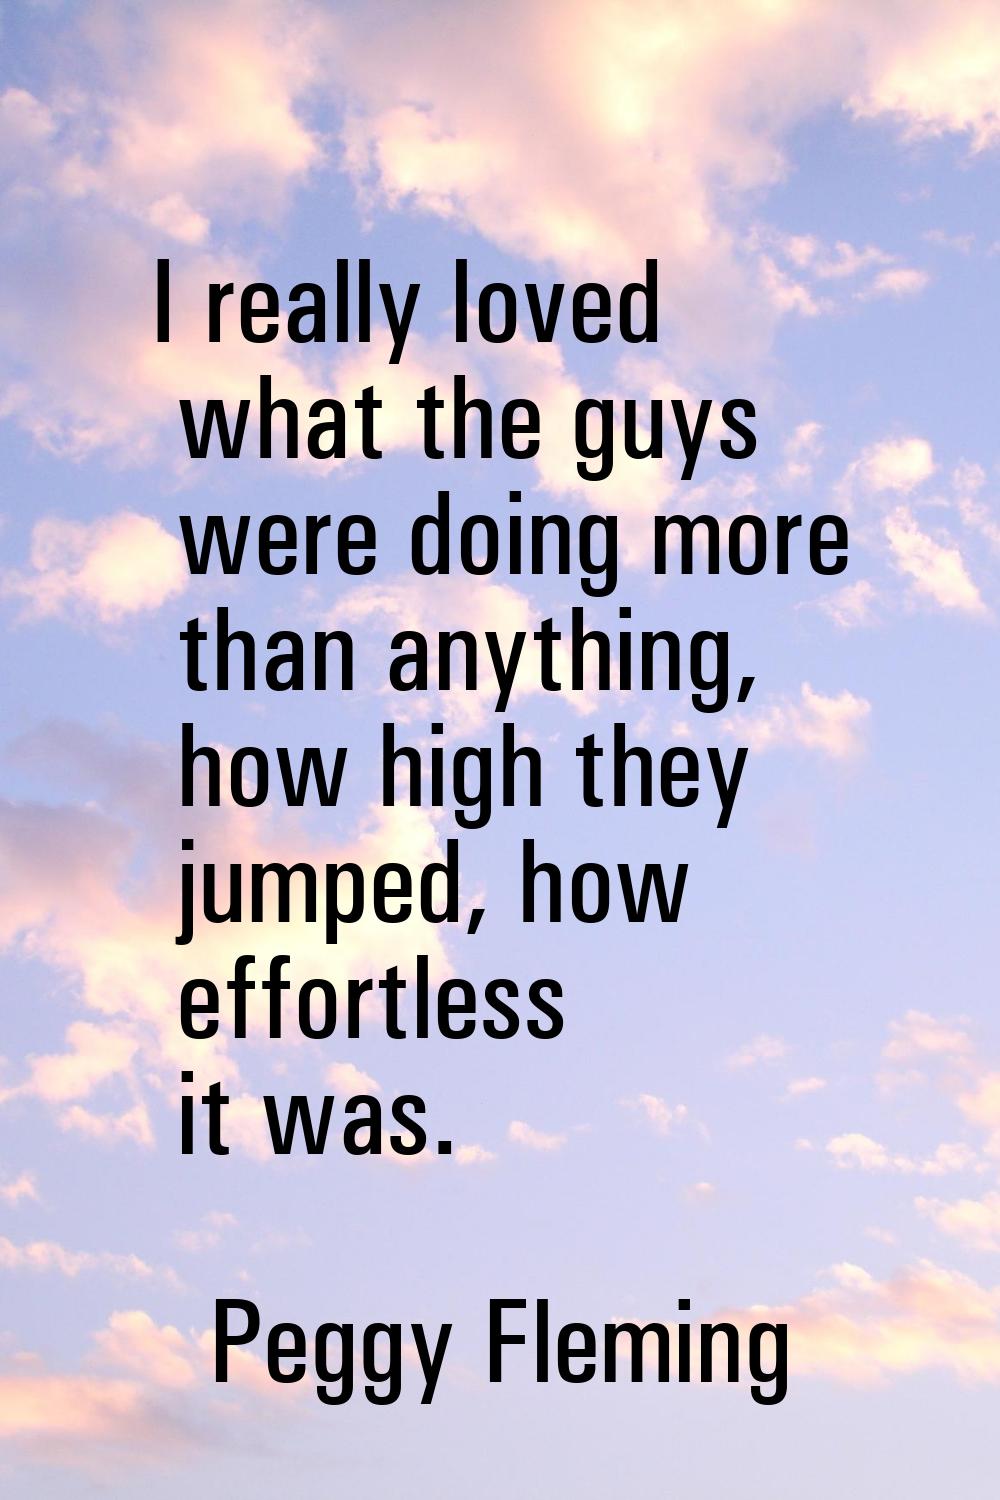 I really loved what the guys were doing more than anything, how high they jumped, how effortless it